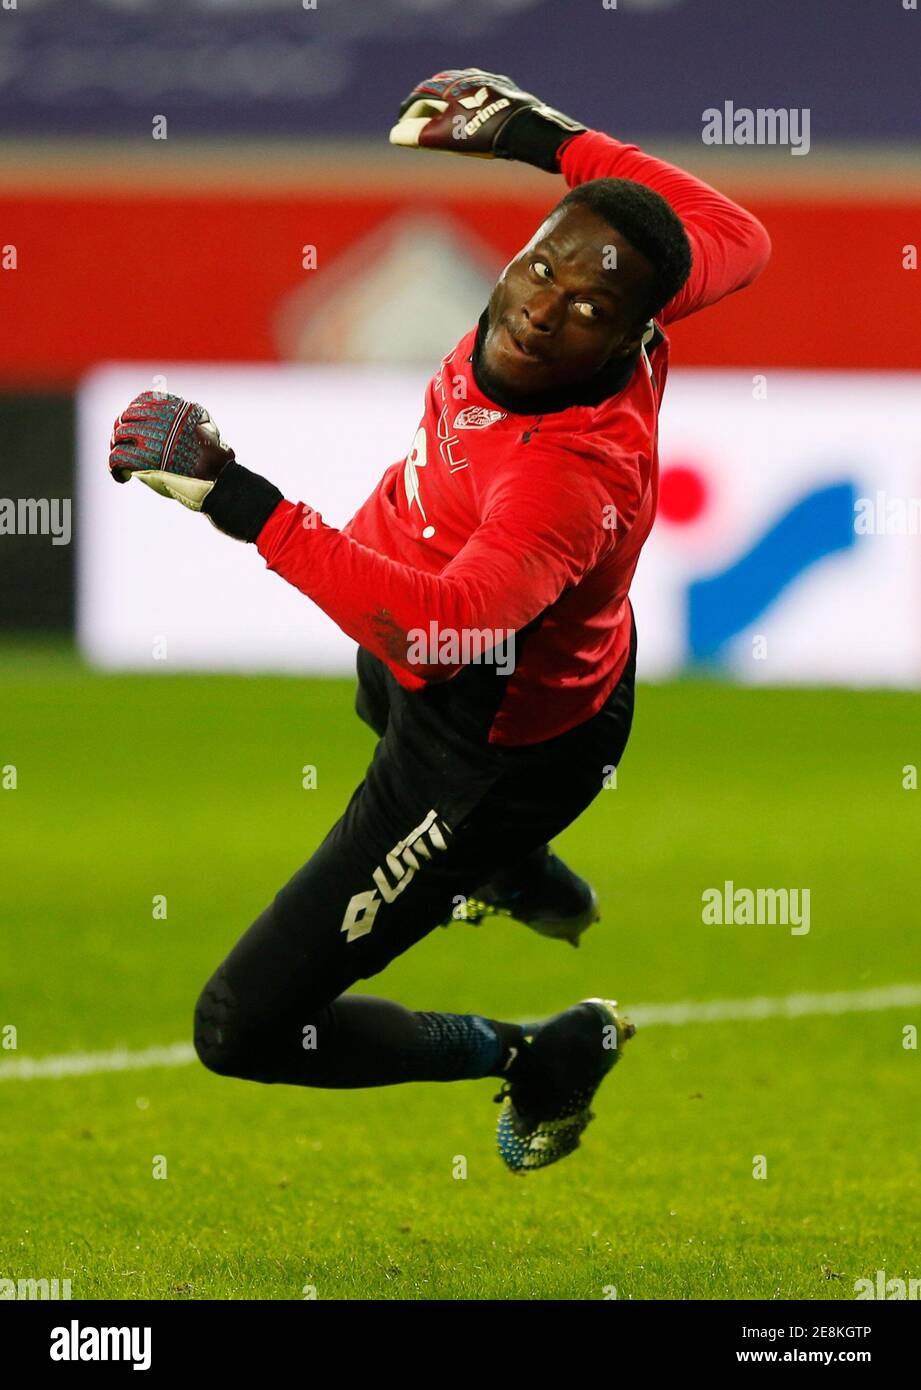 Soccer Football - Ligue 1 - Lille v Dijon - Stade Pierre-Mauroy, Lille,  France - January 31, 2021 Dijon's Saturnin Allagbe during the warm up  before the match REUTERS/Pascal Rossignol Stock Photo - Alamy